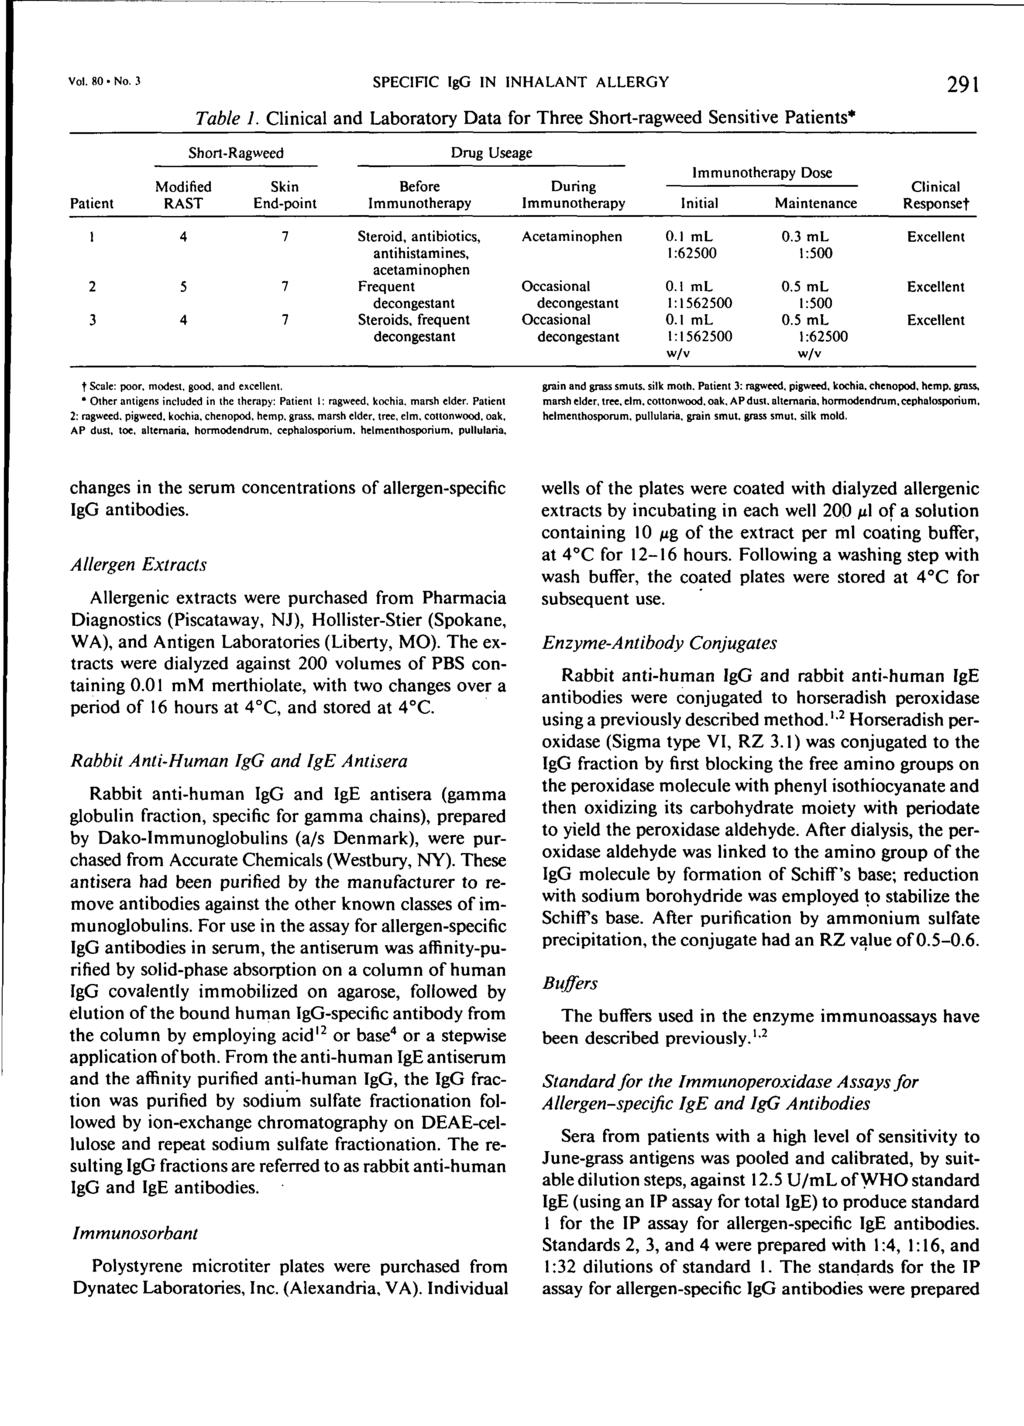 vol. 80-No. 3 SPECIFIC IgG IN INHALANT ALLERGY Table 1.